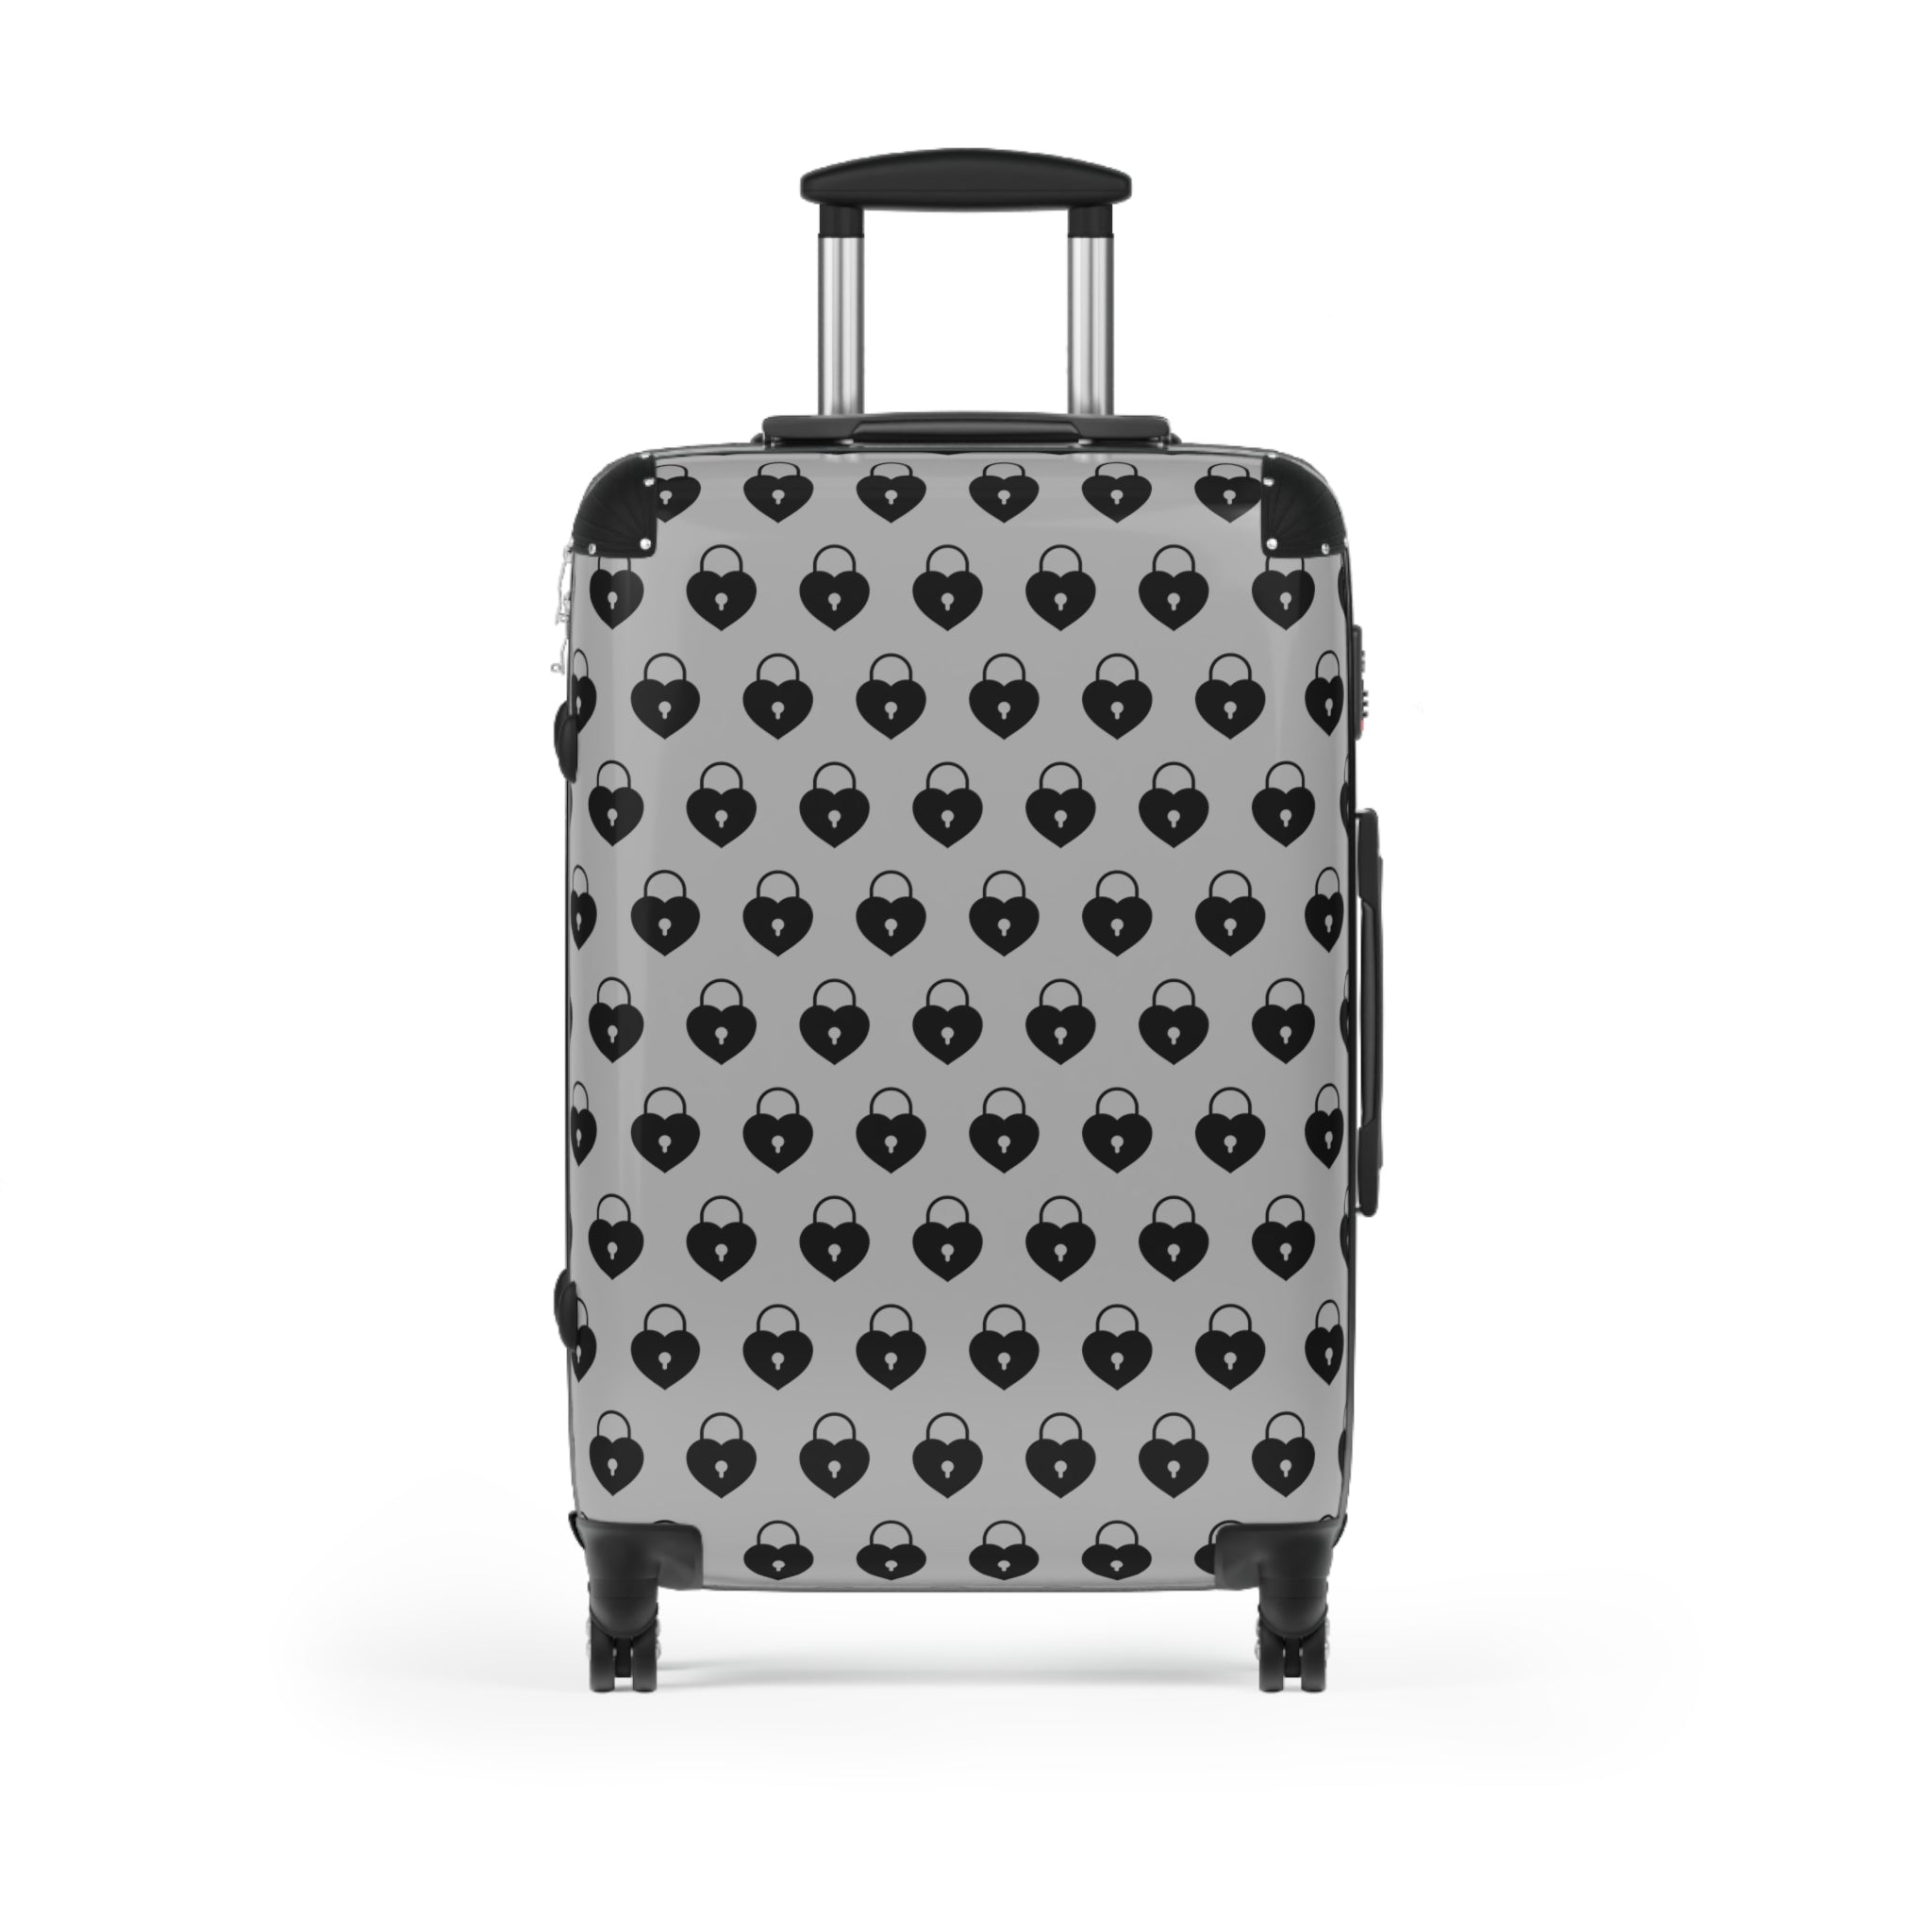 Abby Travel Collection Terrific and Co. (Lock Pattern) Grey Suitcase, Hard Shell Luggage, Rolling Suitcase for Travel, Carry On Bag Bags Medium-Black The Middle Aged Groove